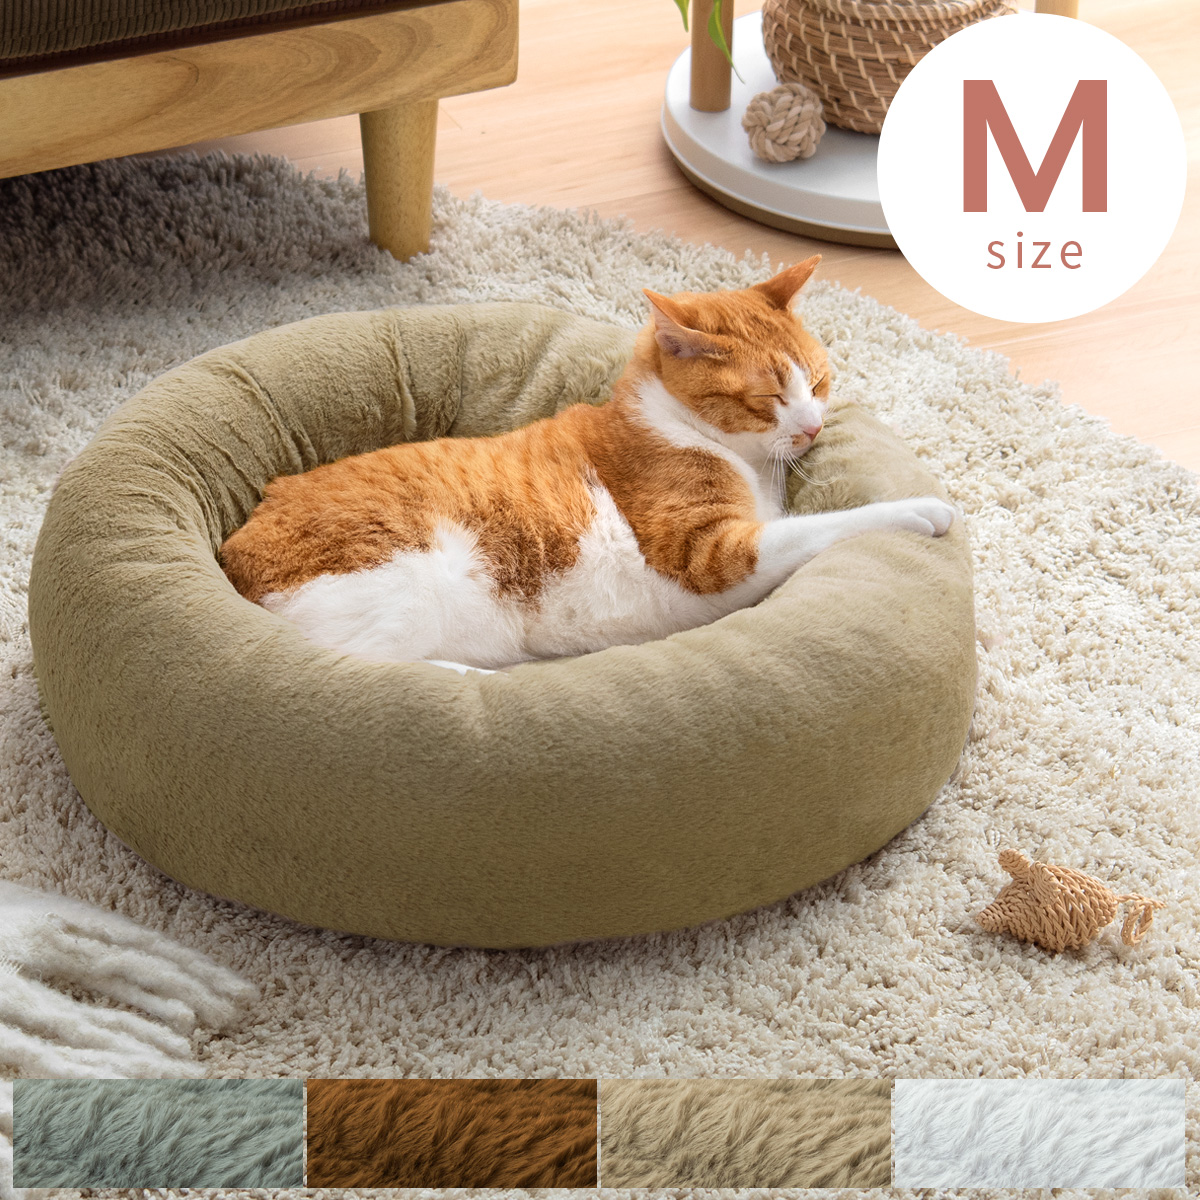  pet bed pet bed stylish ... cat cat dog bed cushion all season for pets bed cat bed dog bed pet accessories M size 